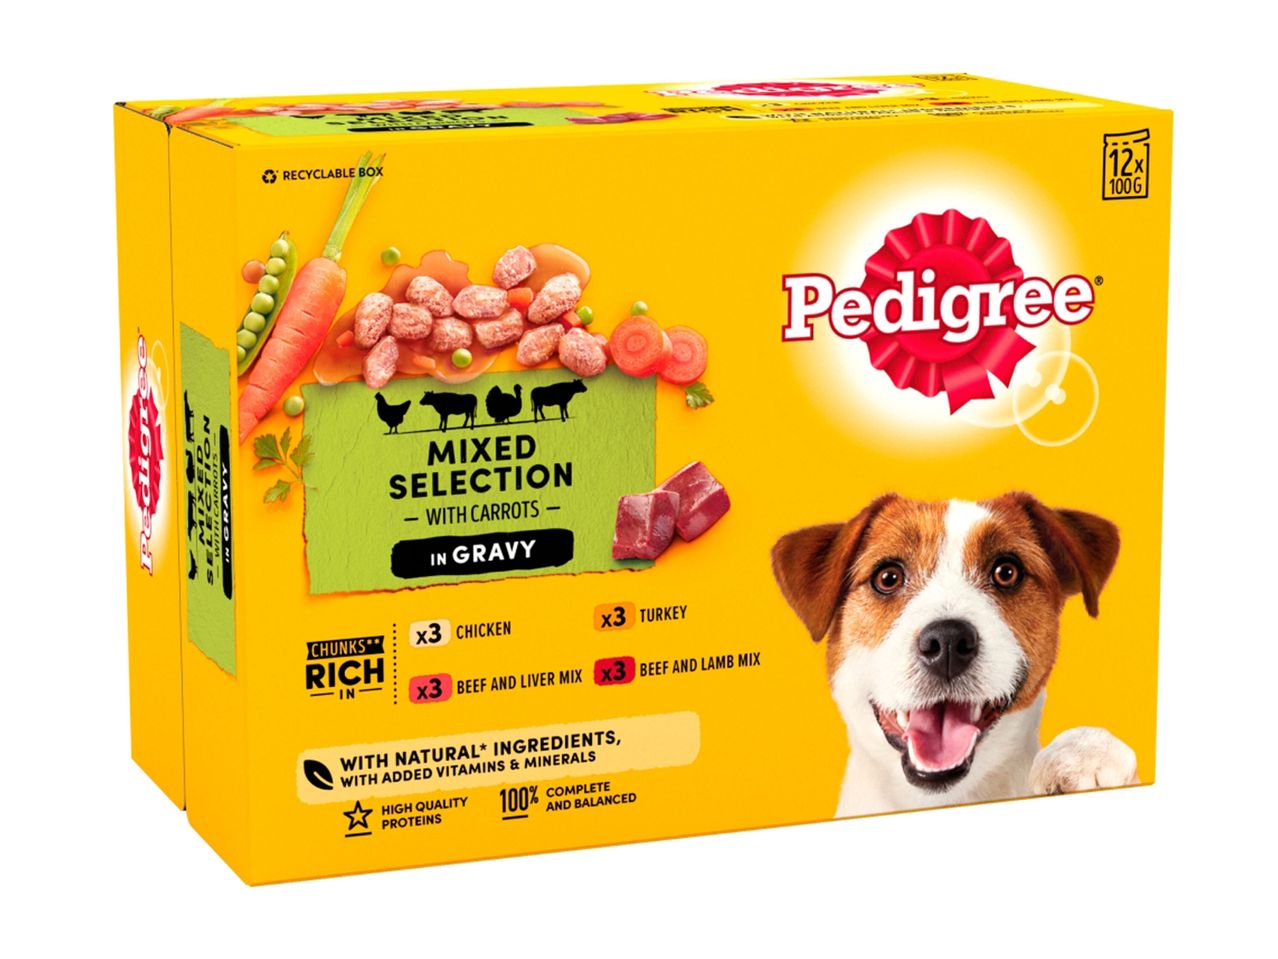 Go to full screen view: Pedigree Dog Pouches - Image 1